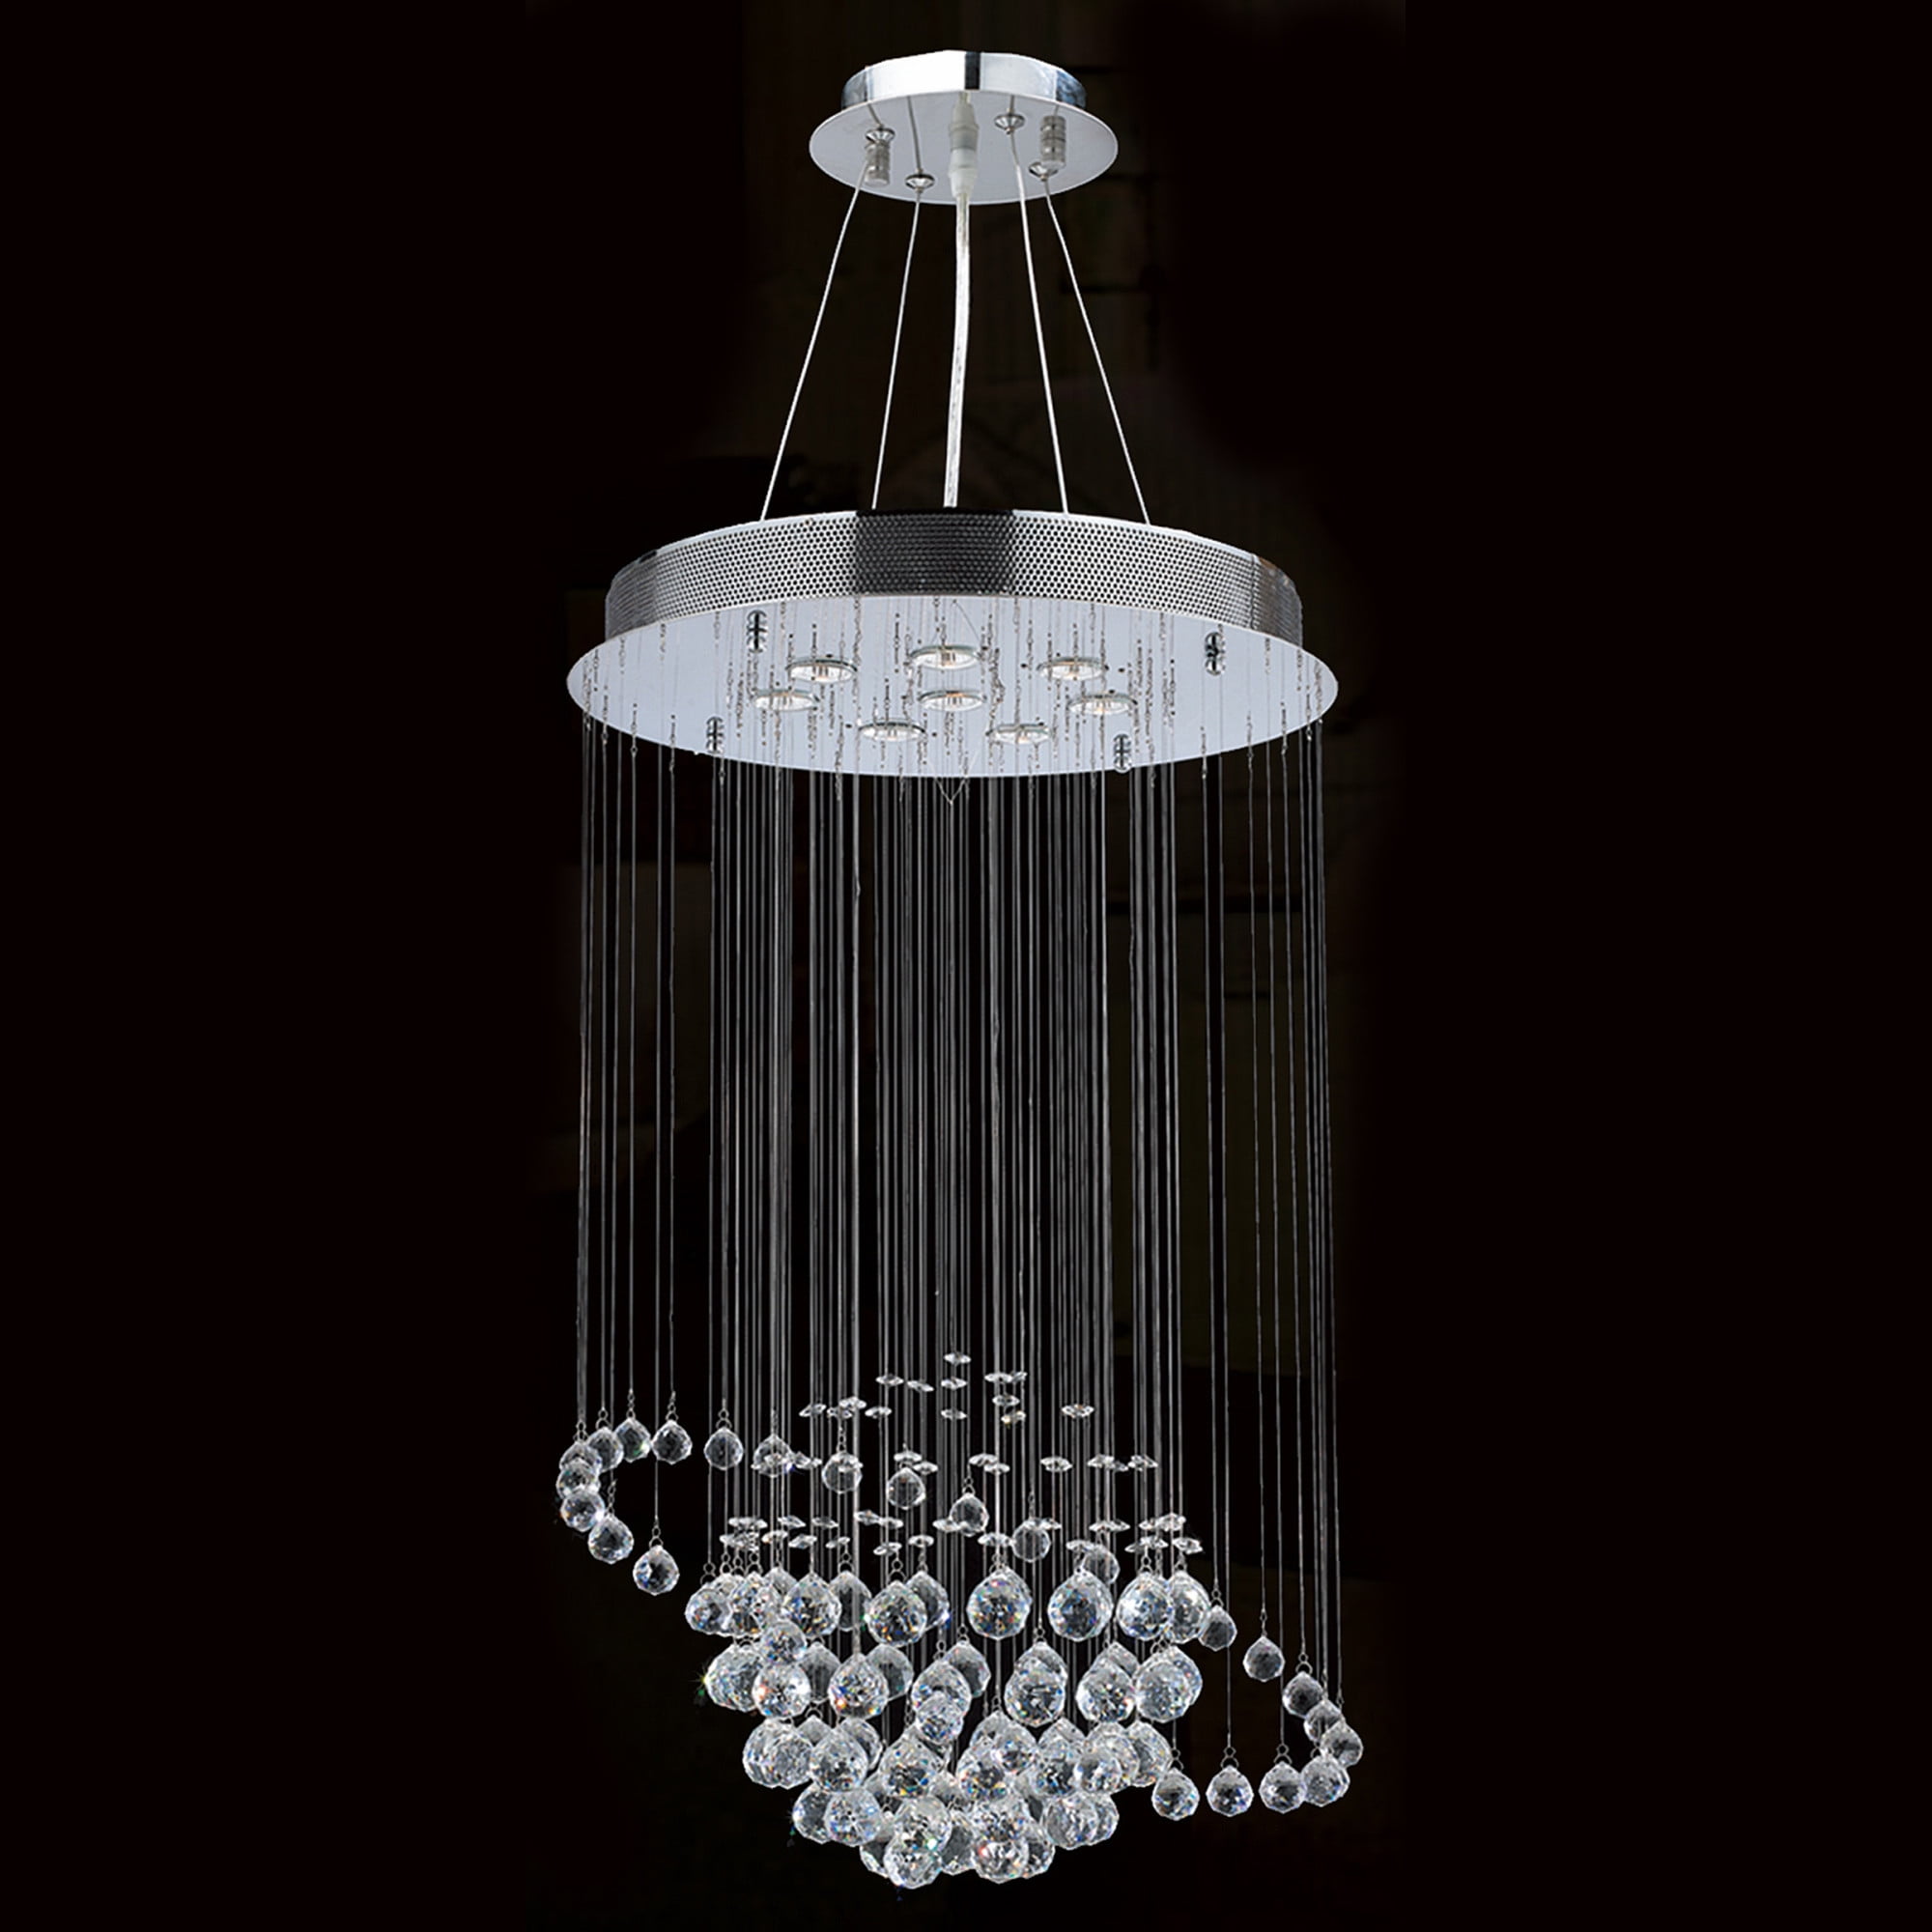 Saturn Collection 8 Light Chrome Finish and Clear Crystal Galaxy Chandelier 22" D x 36" H Medium